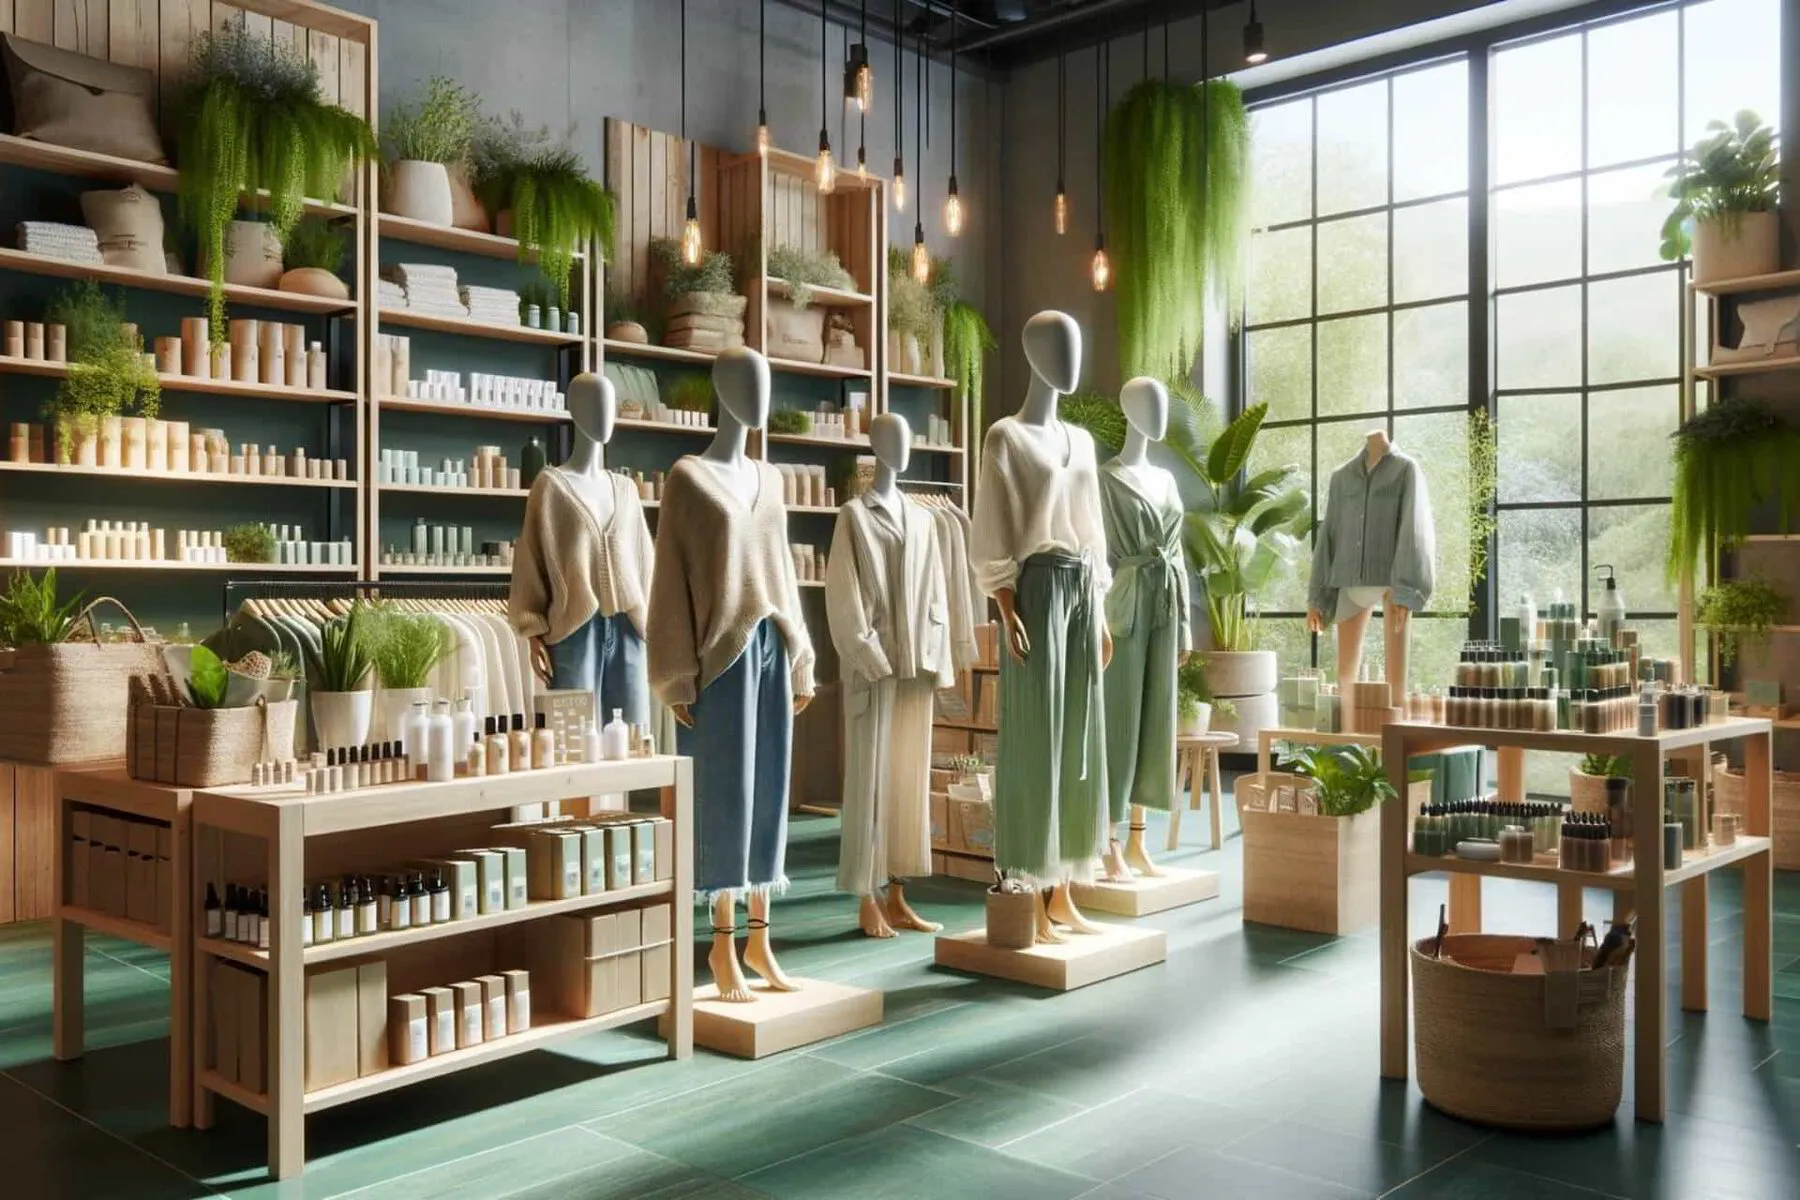 image showcasing sustainable fashion and beauty choices. The scene includes a clothing store with eco-friendly materials